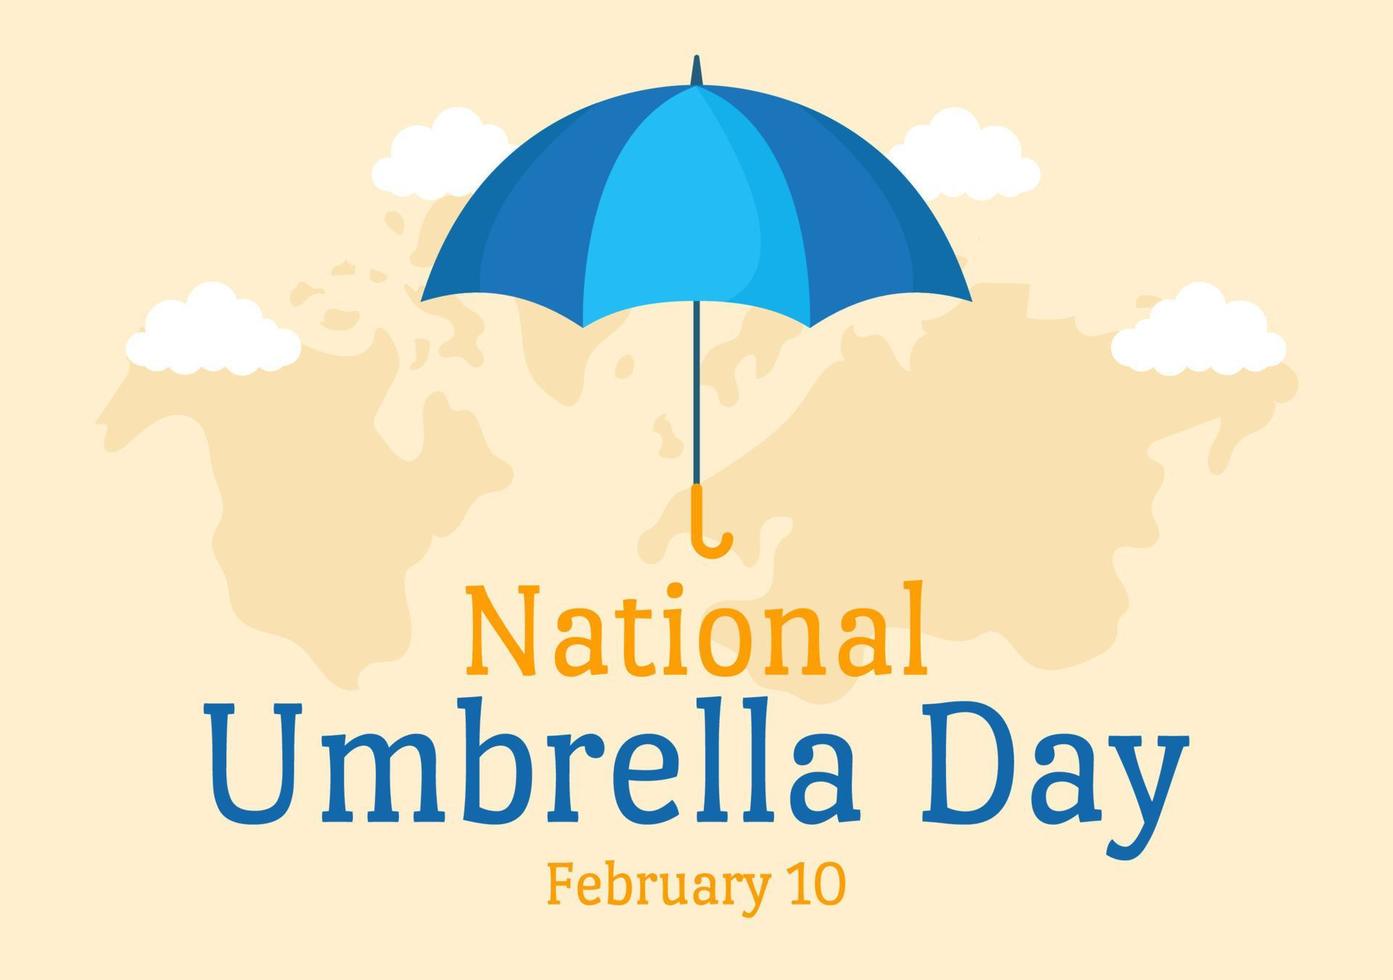 National Umbrella Day Celebration on February 10th to Protect us from